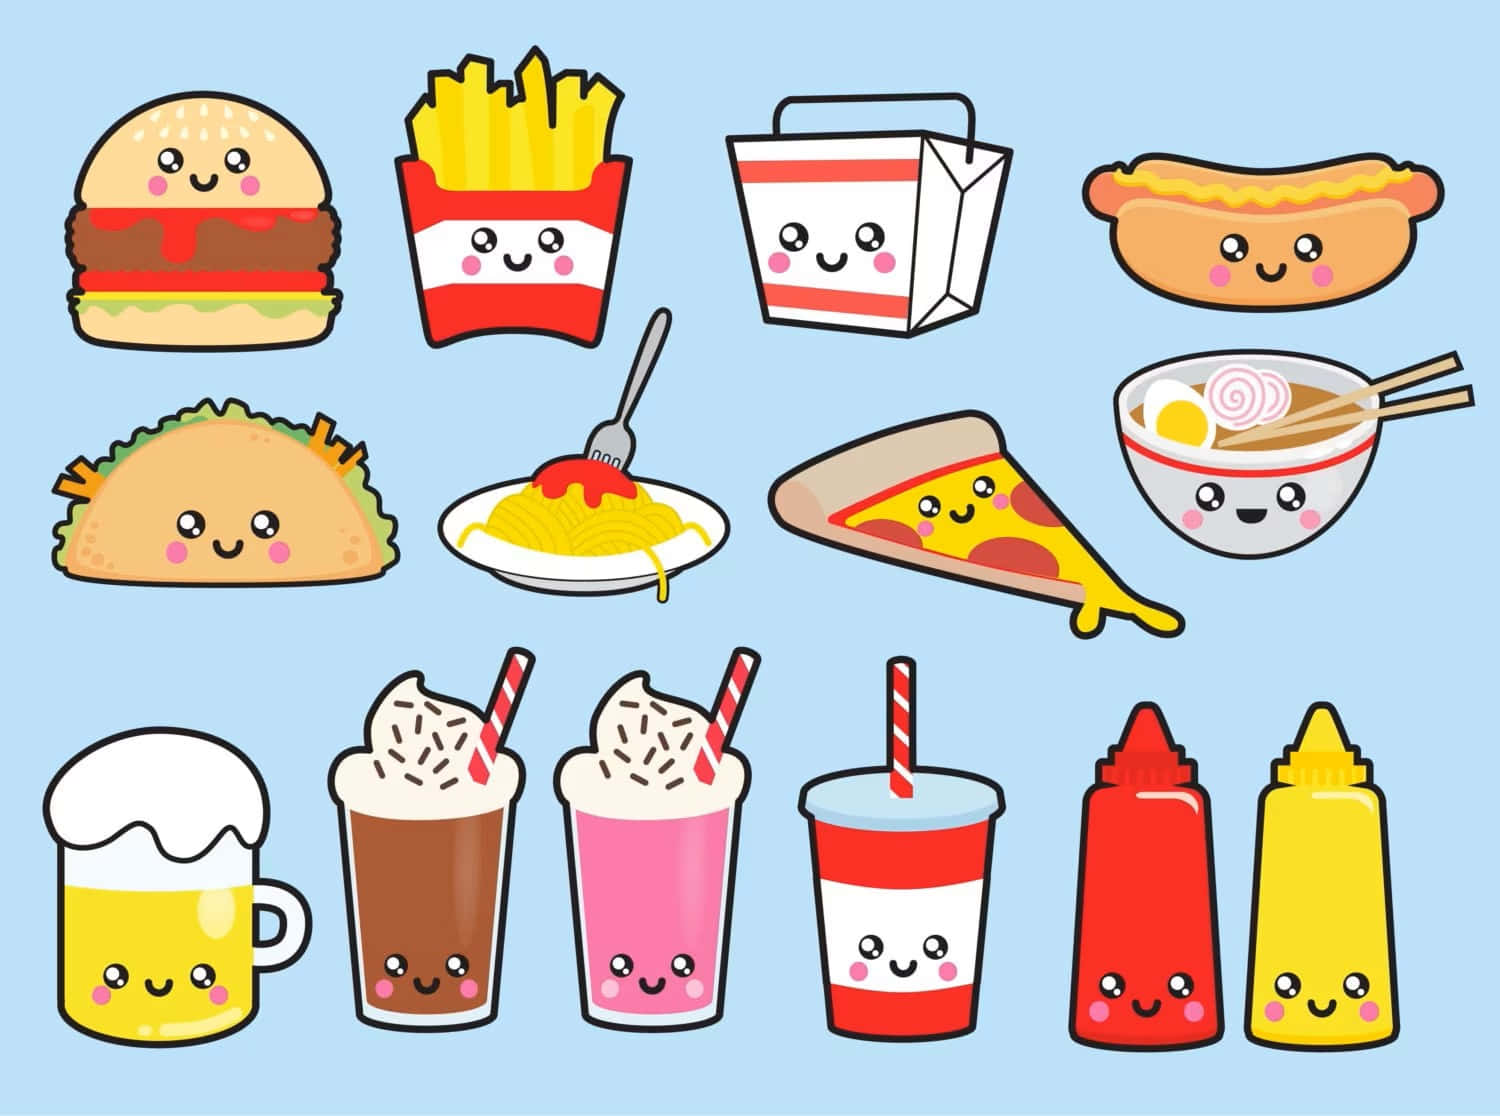 Kawaii Sweets Clipart Cute Sweet Candy Clipart Food Cake Donut Cupcake  Gumball Machine Macaron Candies Cookie Ice Cream Muffin Dessert Party -  Etsy | Cute easy drawings, Cute small drawings, Kawaii doodles